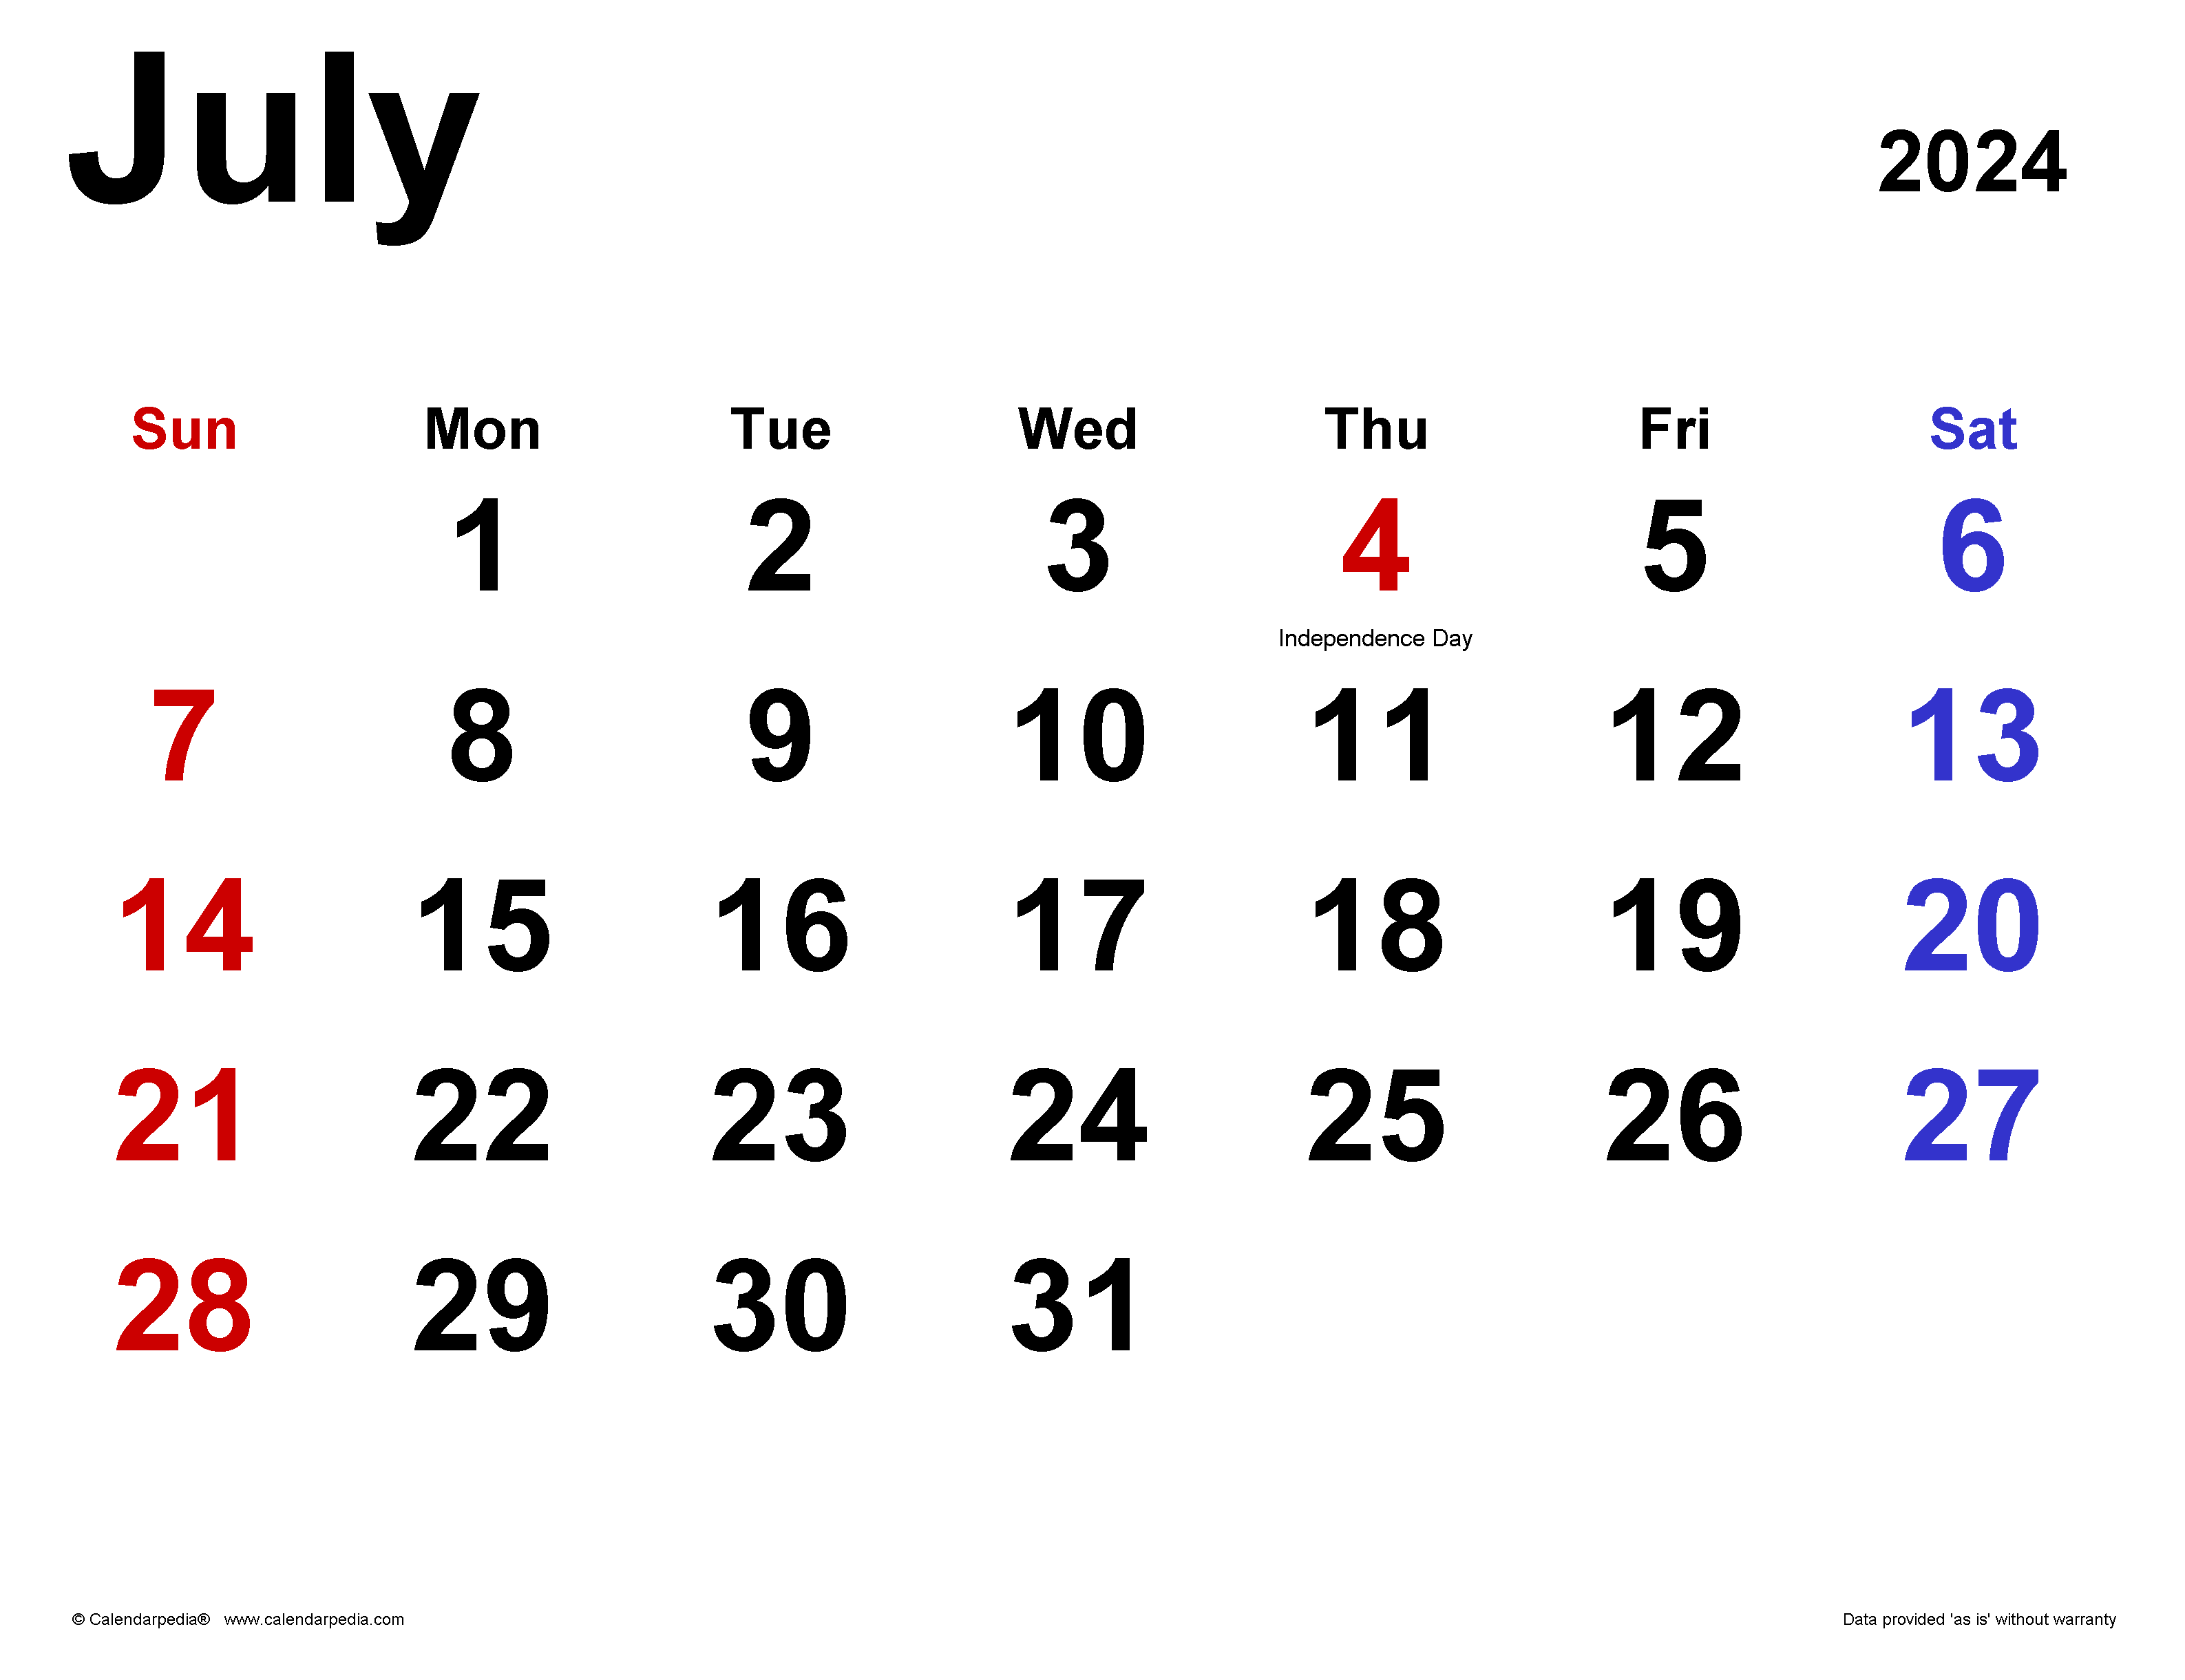 July 2024 Calendar | Templates For Word, Excel And Pdf intended for 5 Month Wall Calendar Starting July 2024